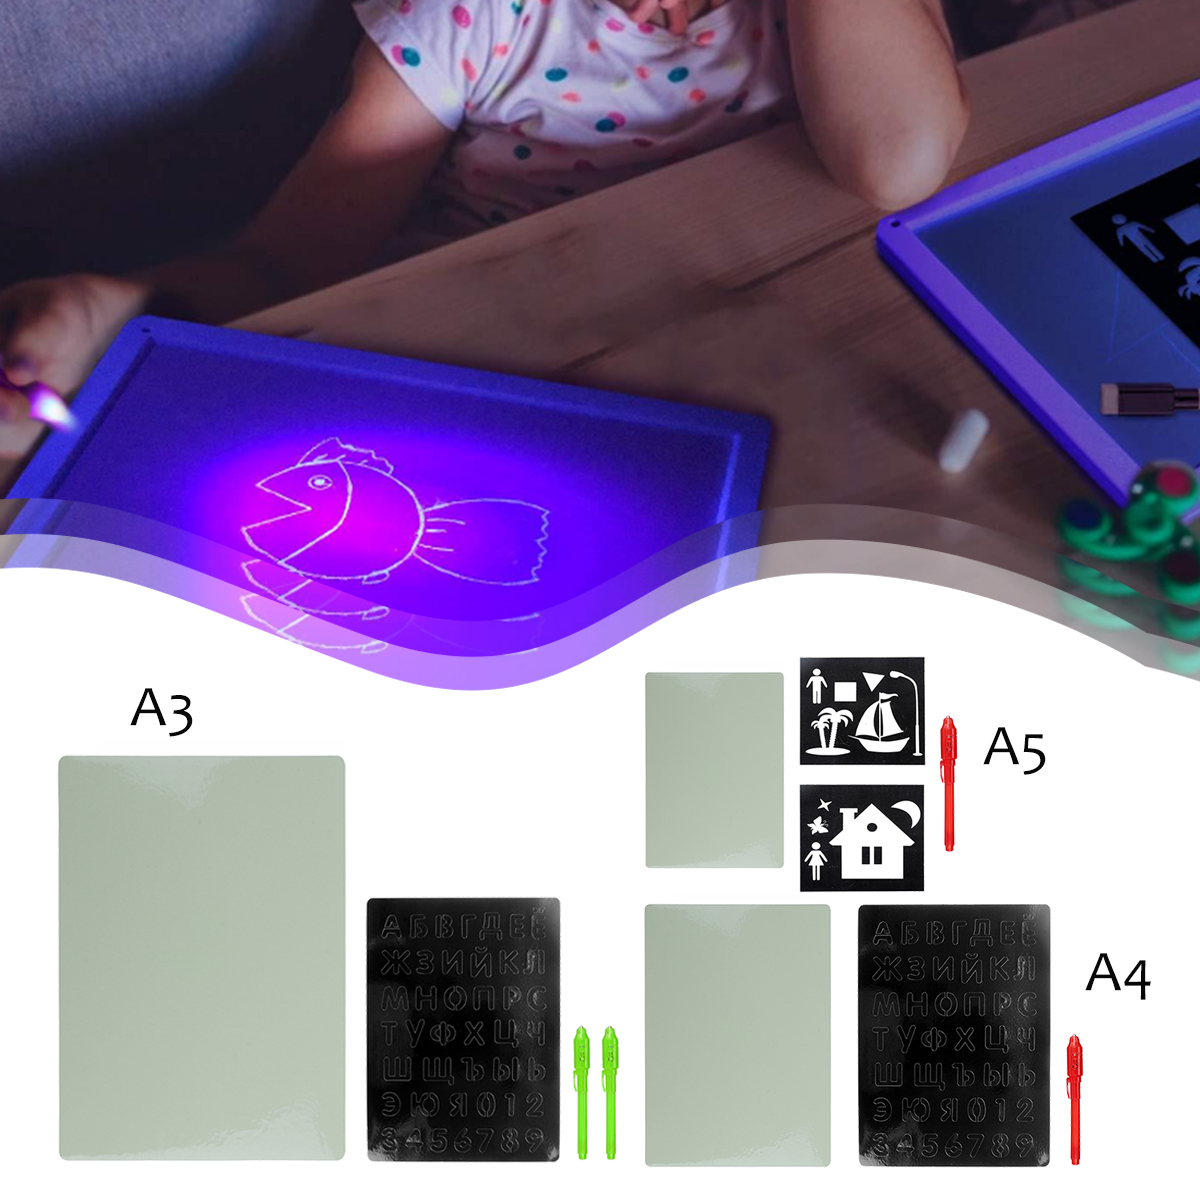 A3A4A5-Magic-Luminous-3D-Drawing-Board-Fluorescent-Developing-Toy-Graffiti-Doodle-Drawing-Board-Kids-1619563-2